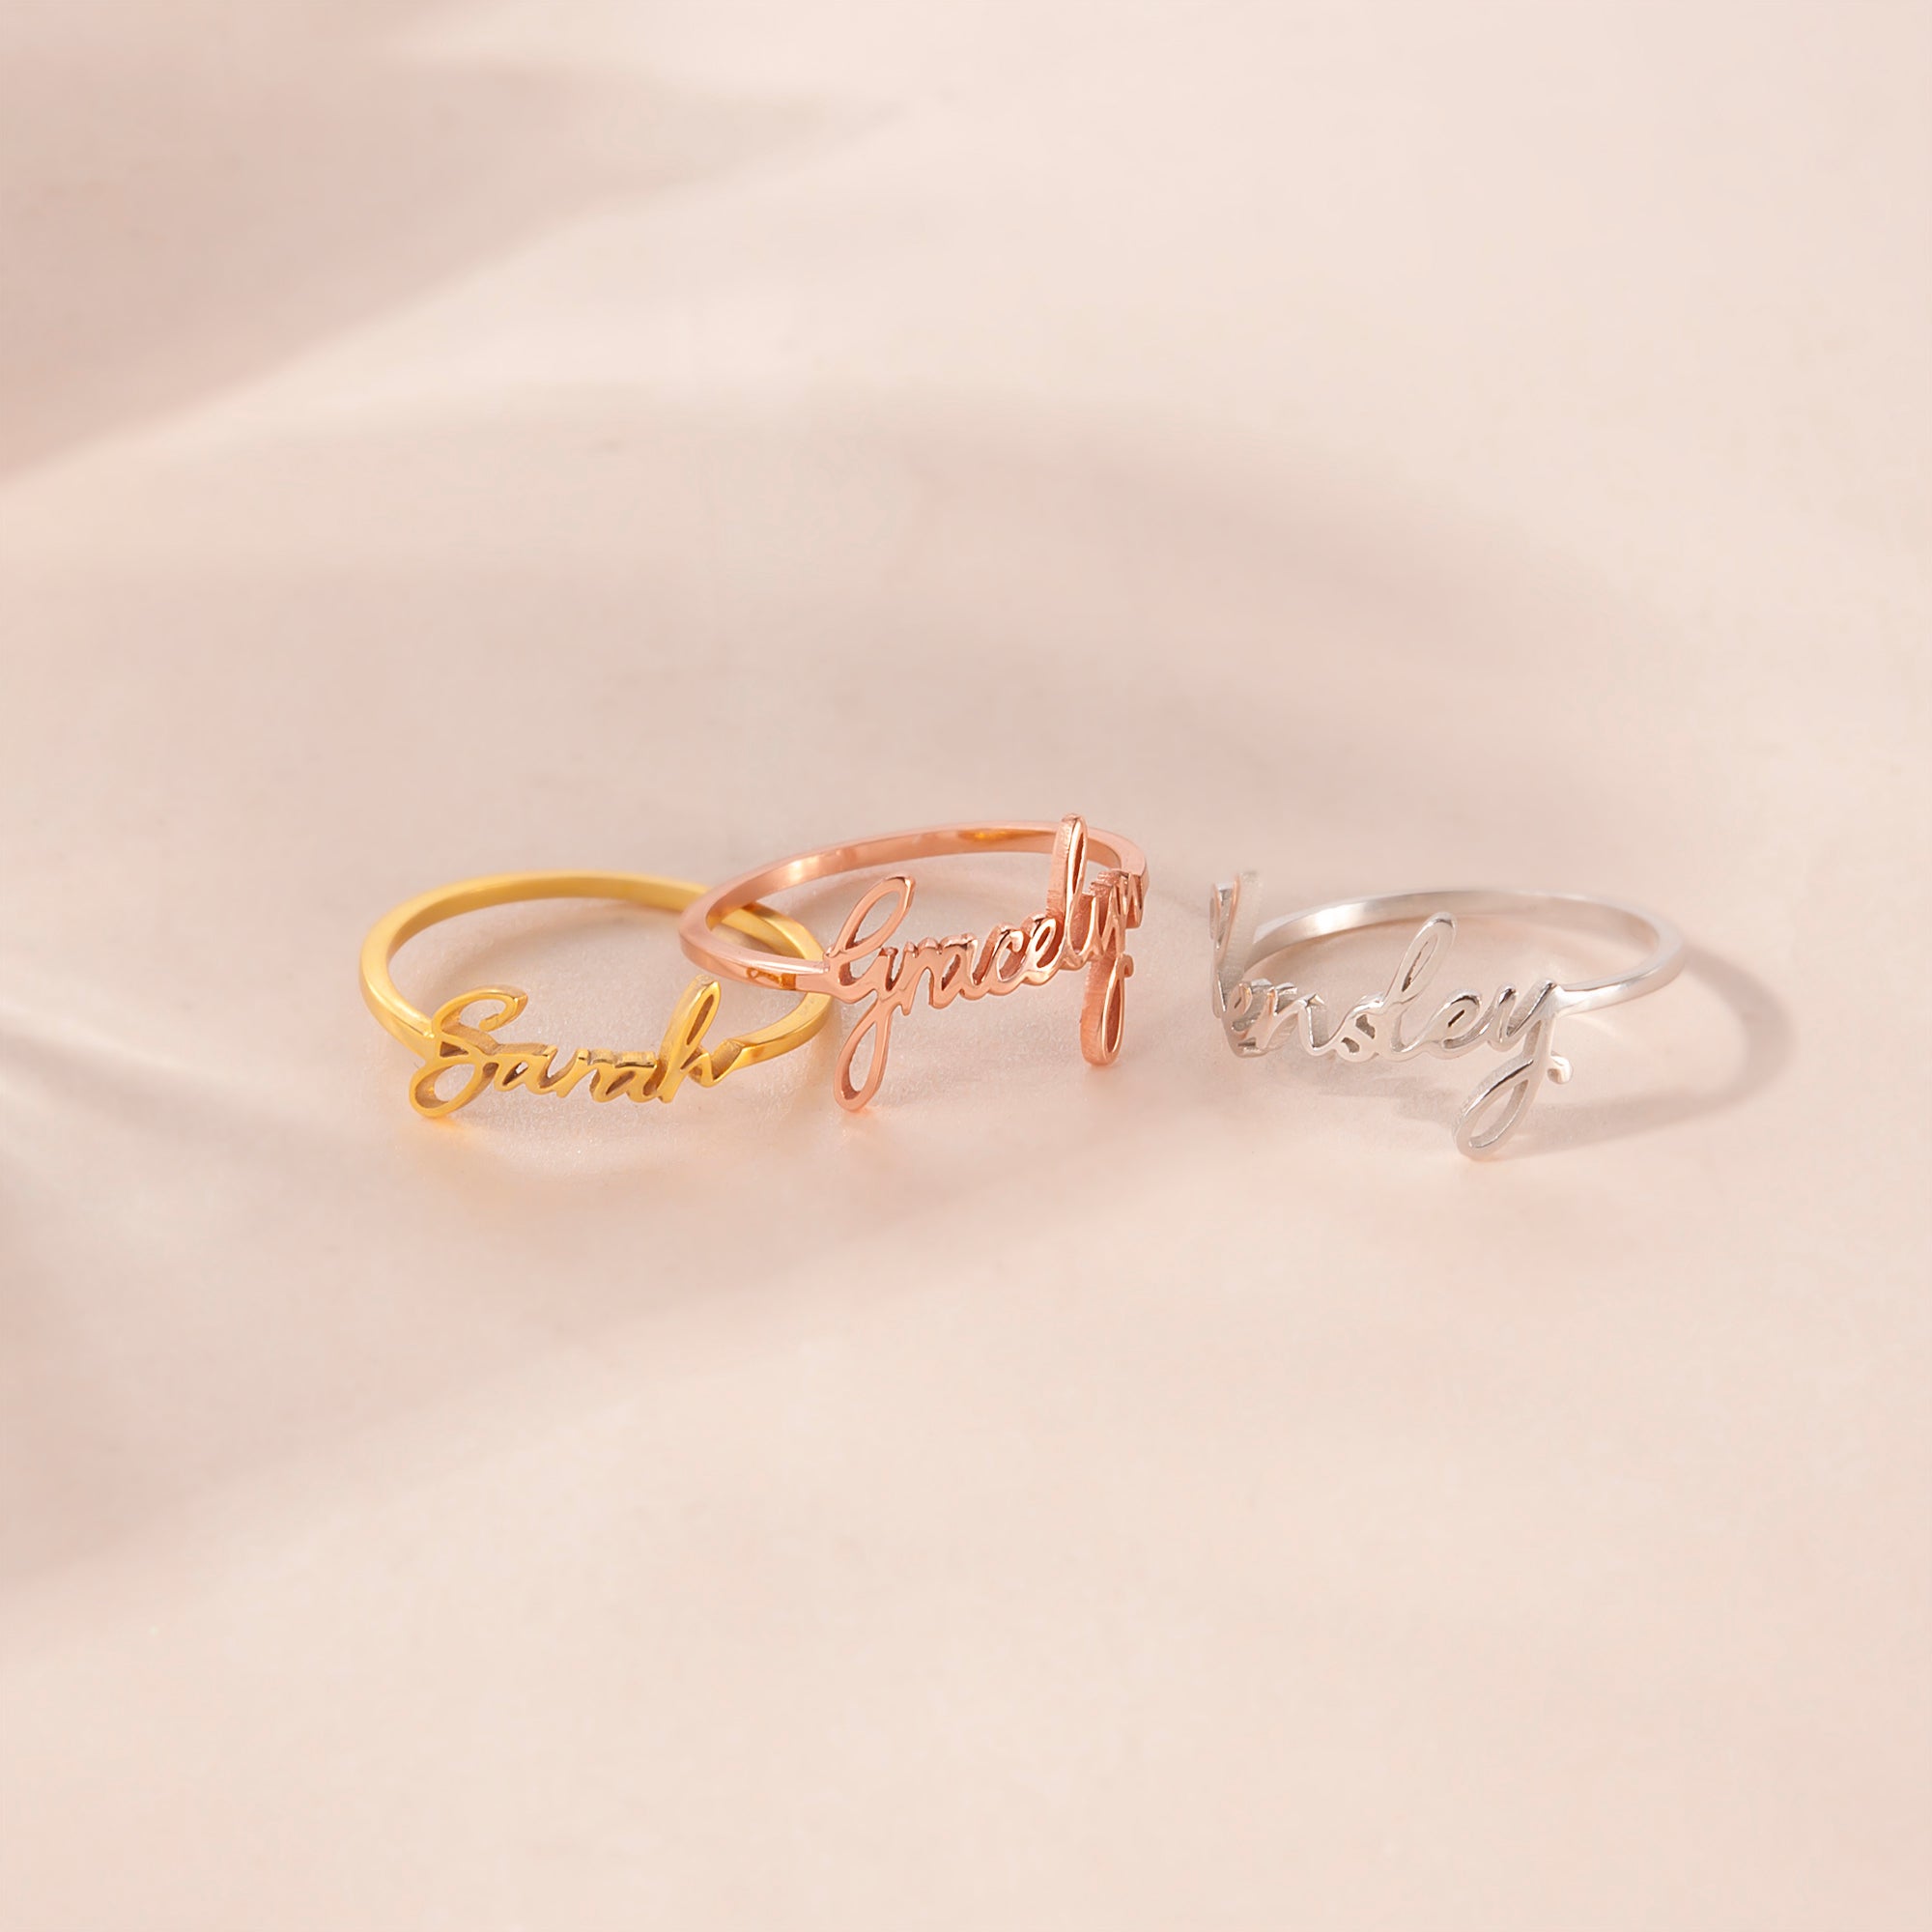 Custom Name Ring, Two Name Ring, Couple Ring, Personalized Ring, Stackable Name  Ring, Gold Name Ring, Name Jewelry, Gift for Her - Etsy